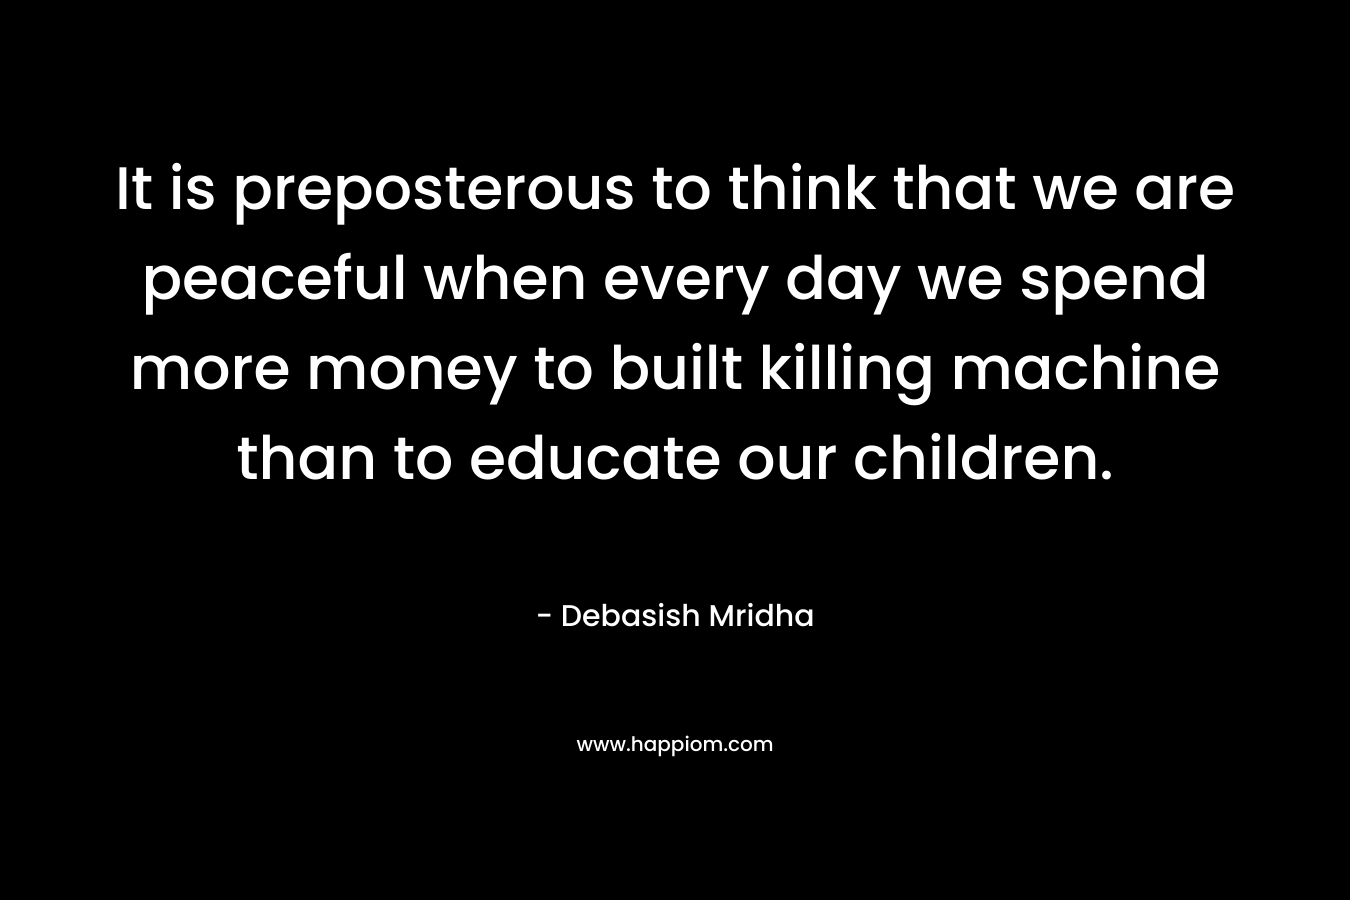 It is preposterous to think that we are peaceful when every day we spend more money to built killing machine than to educate our children.